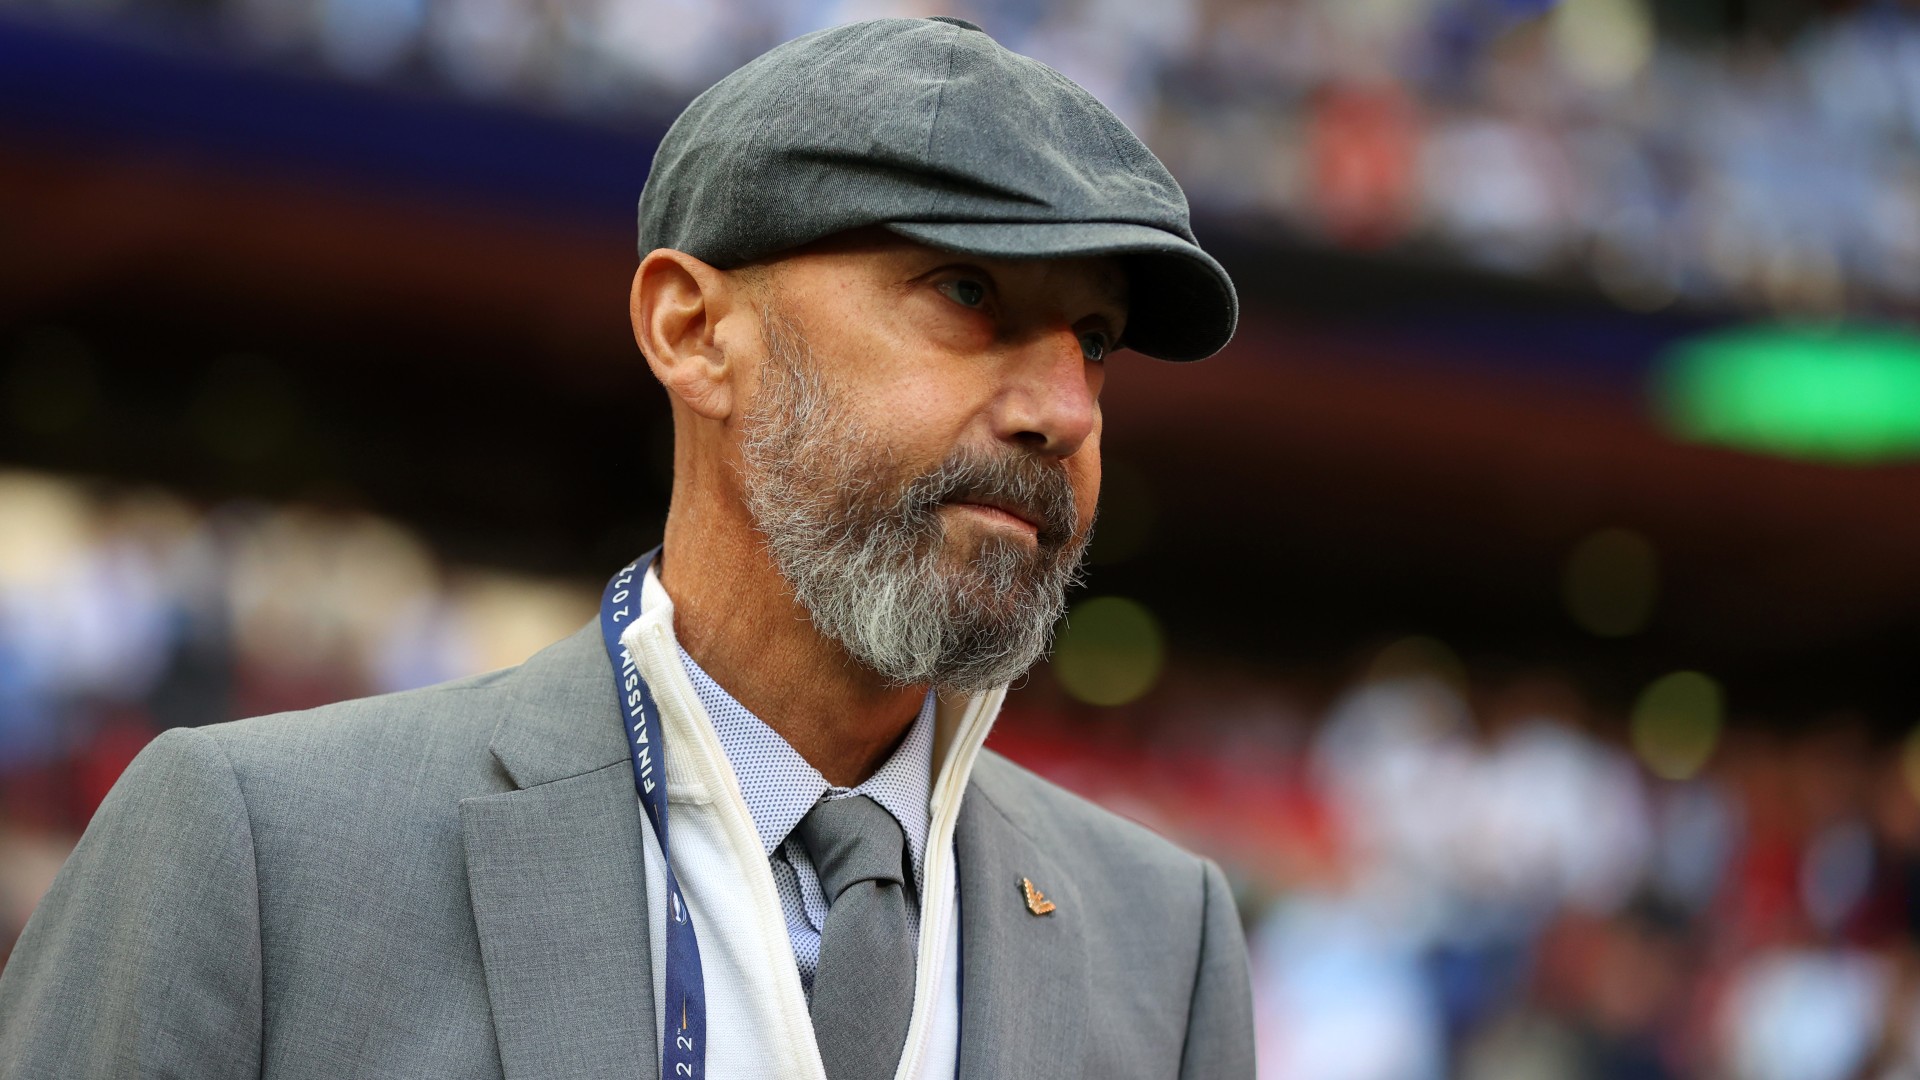 Vialli steps back from Italy role to fight cancer